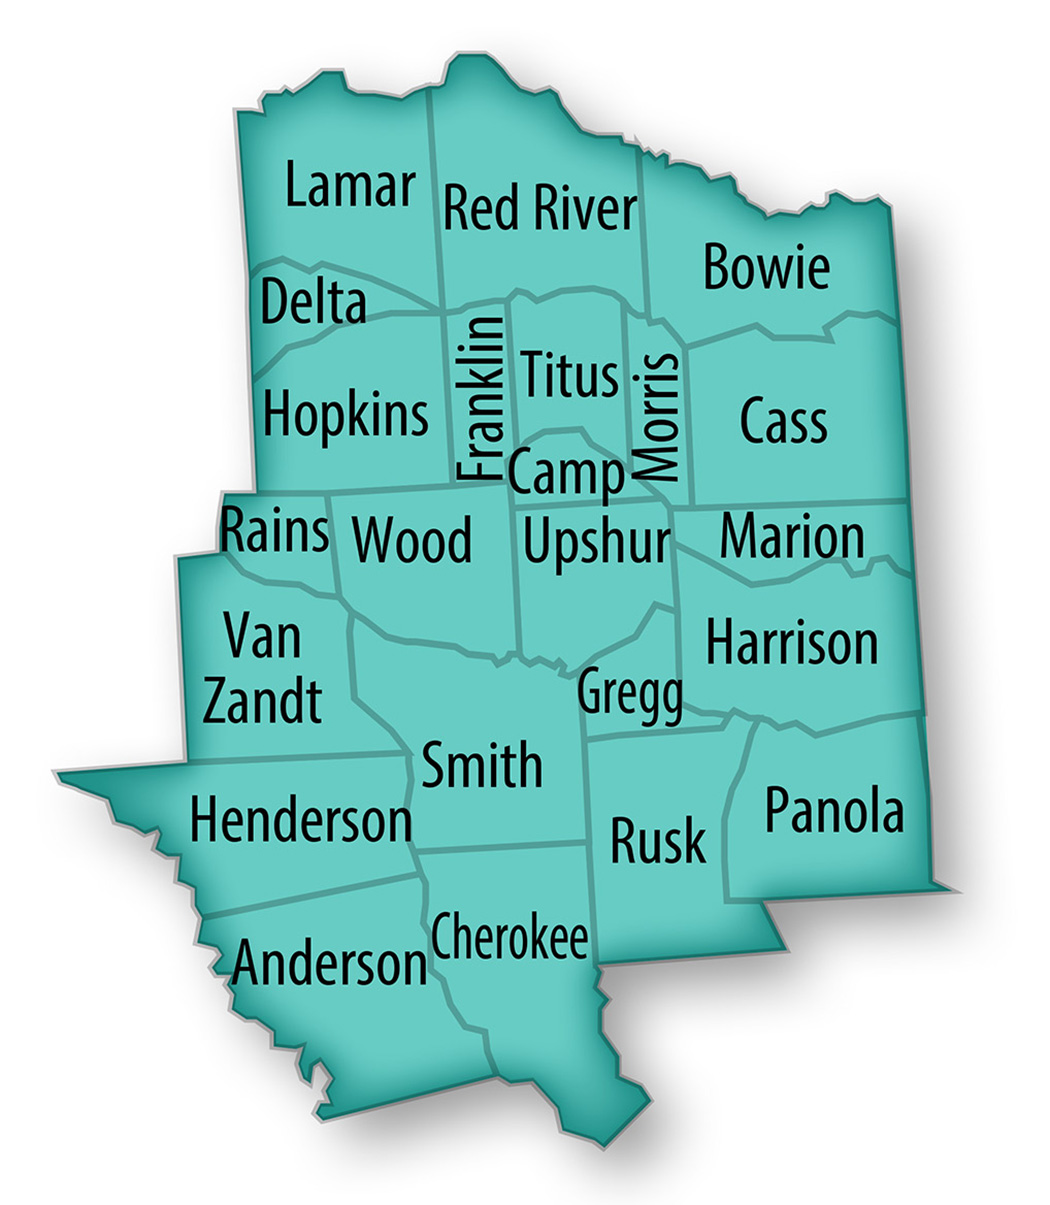 Region 4. For list of counties, see link for the 23 counties.